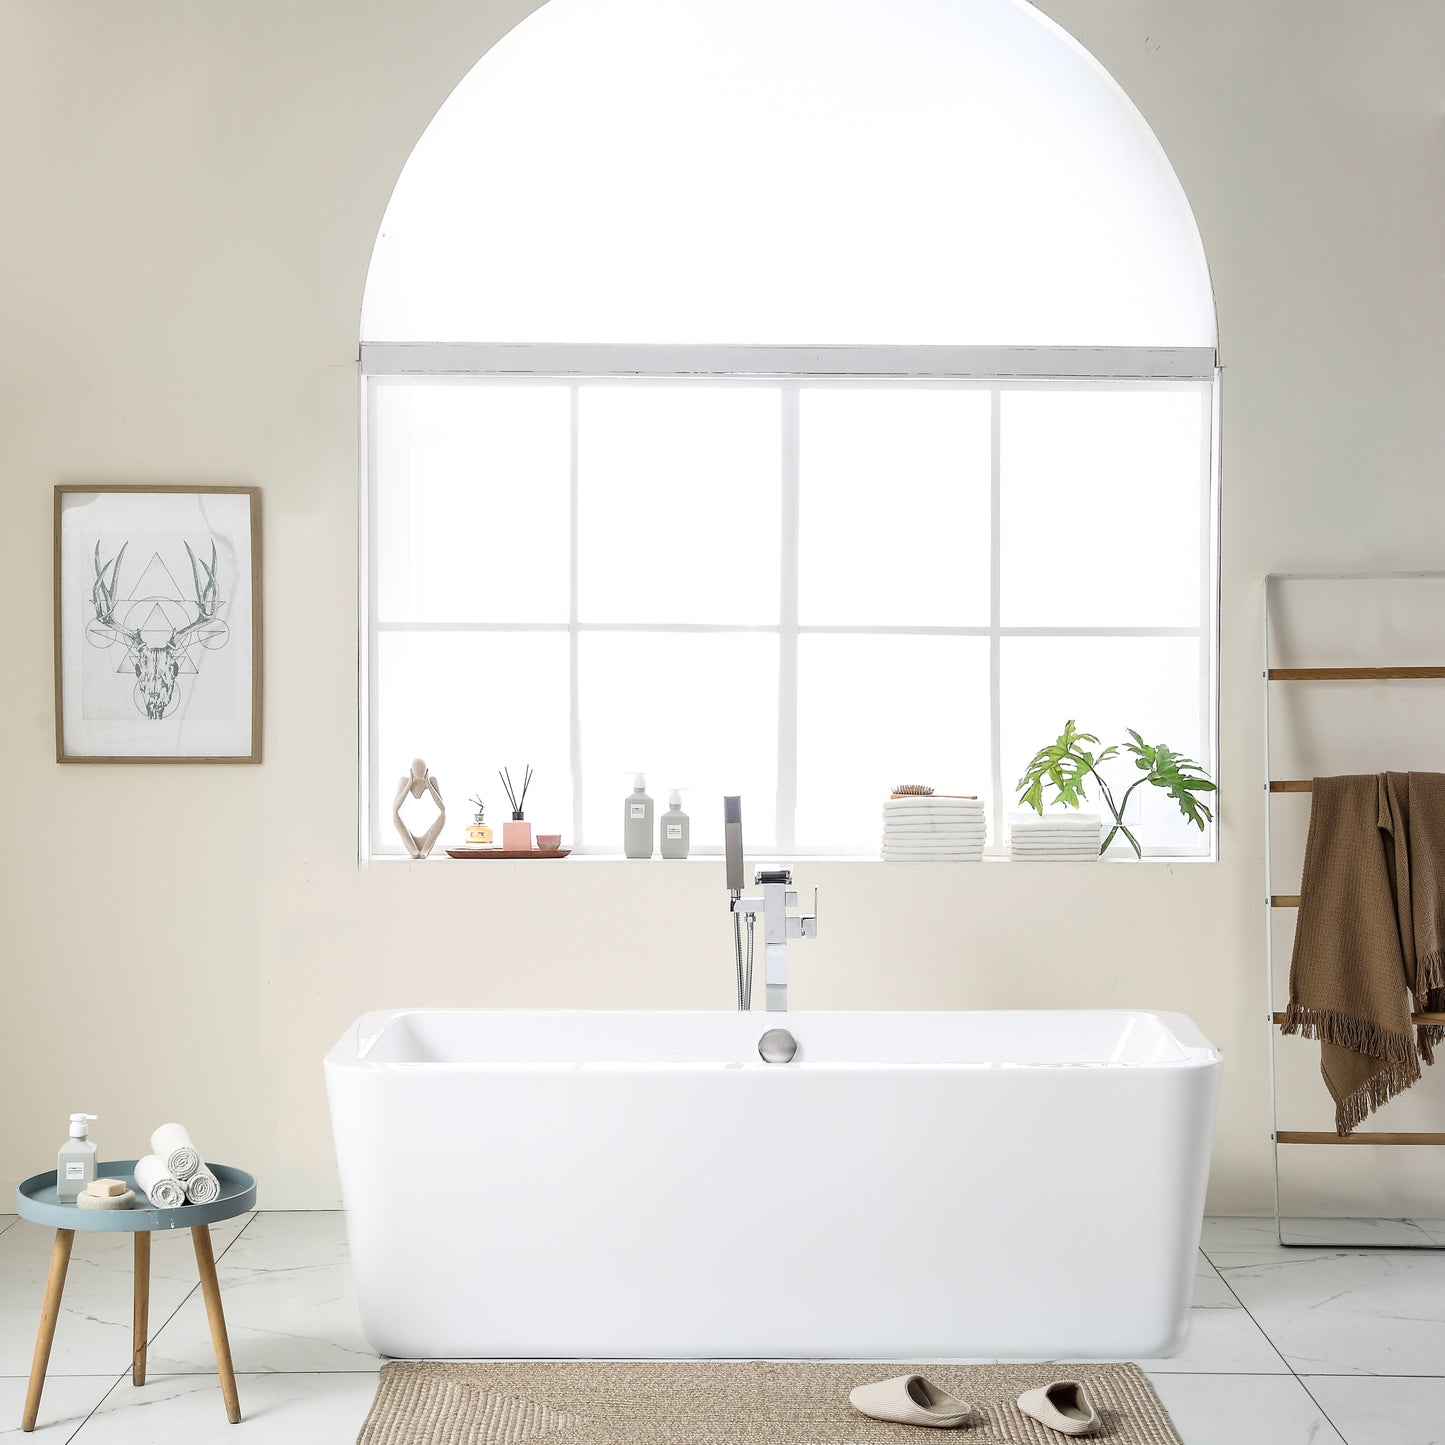 67" Acrylic Art Freestanding Alone White Soaking Bathtub with Brushed Nickel Overflow and Pop-up Drain